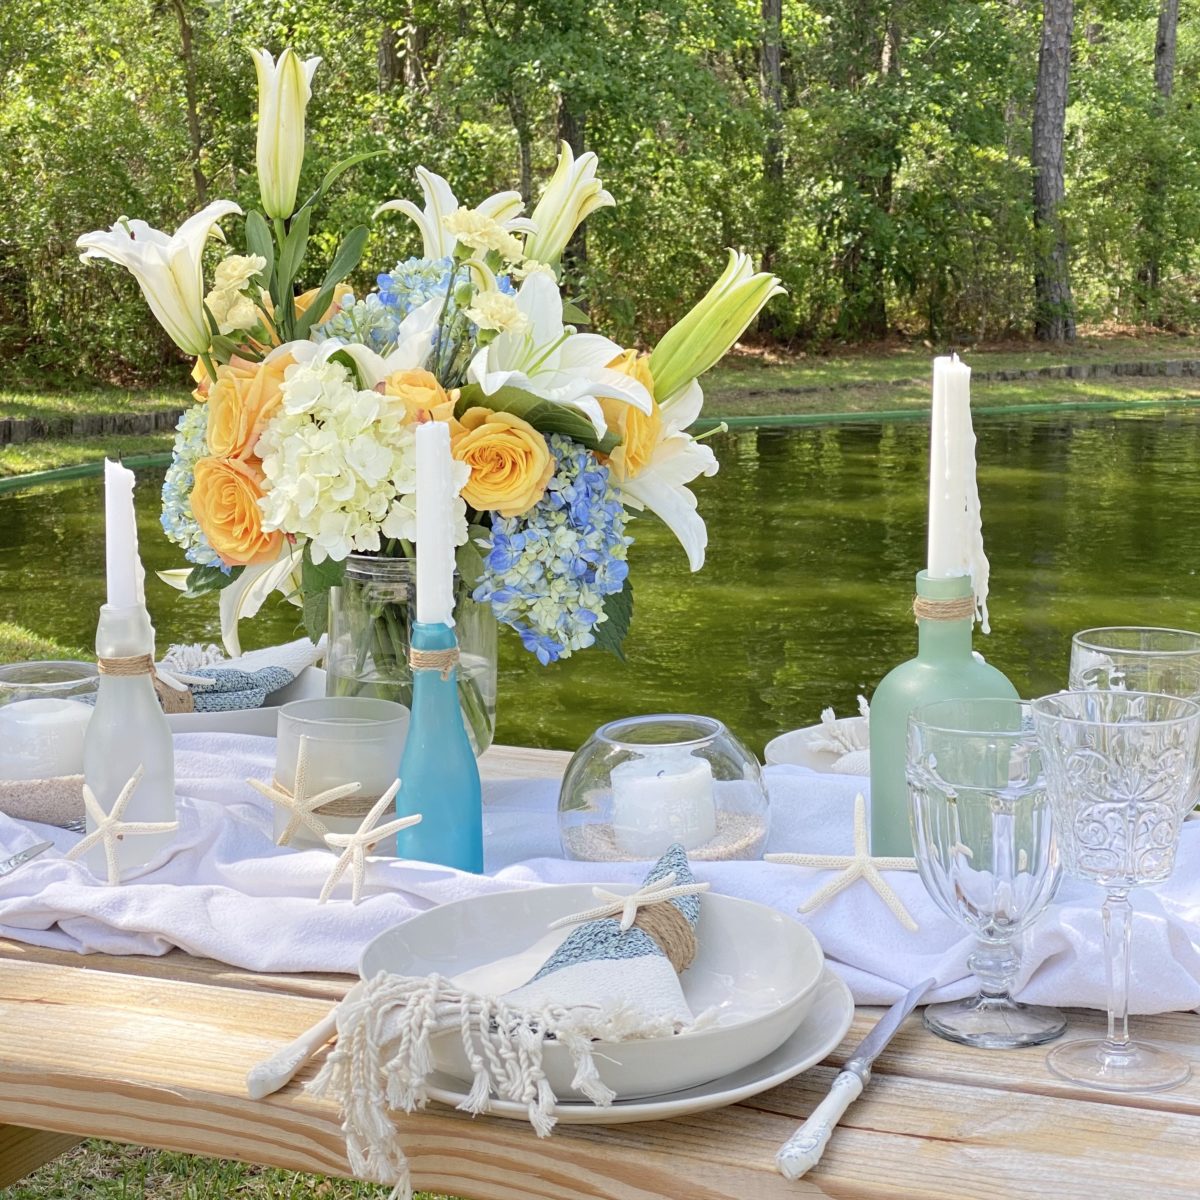 Simple summer tablescape with a coastal vibe.